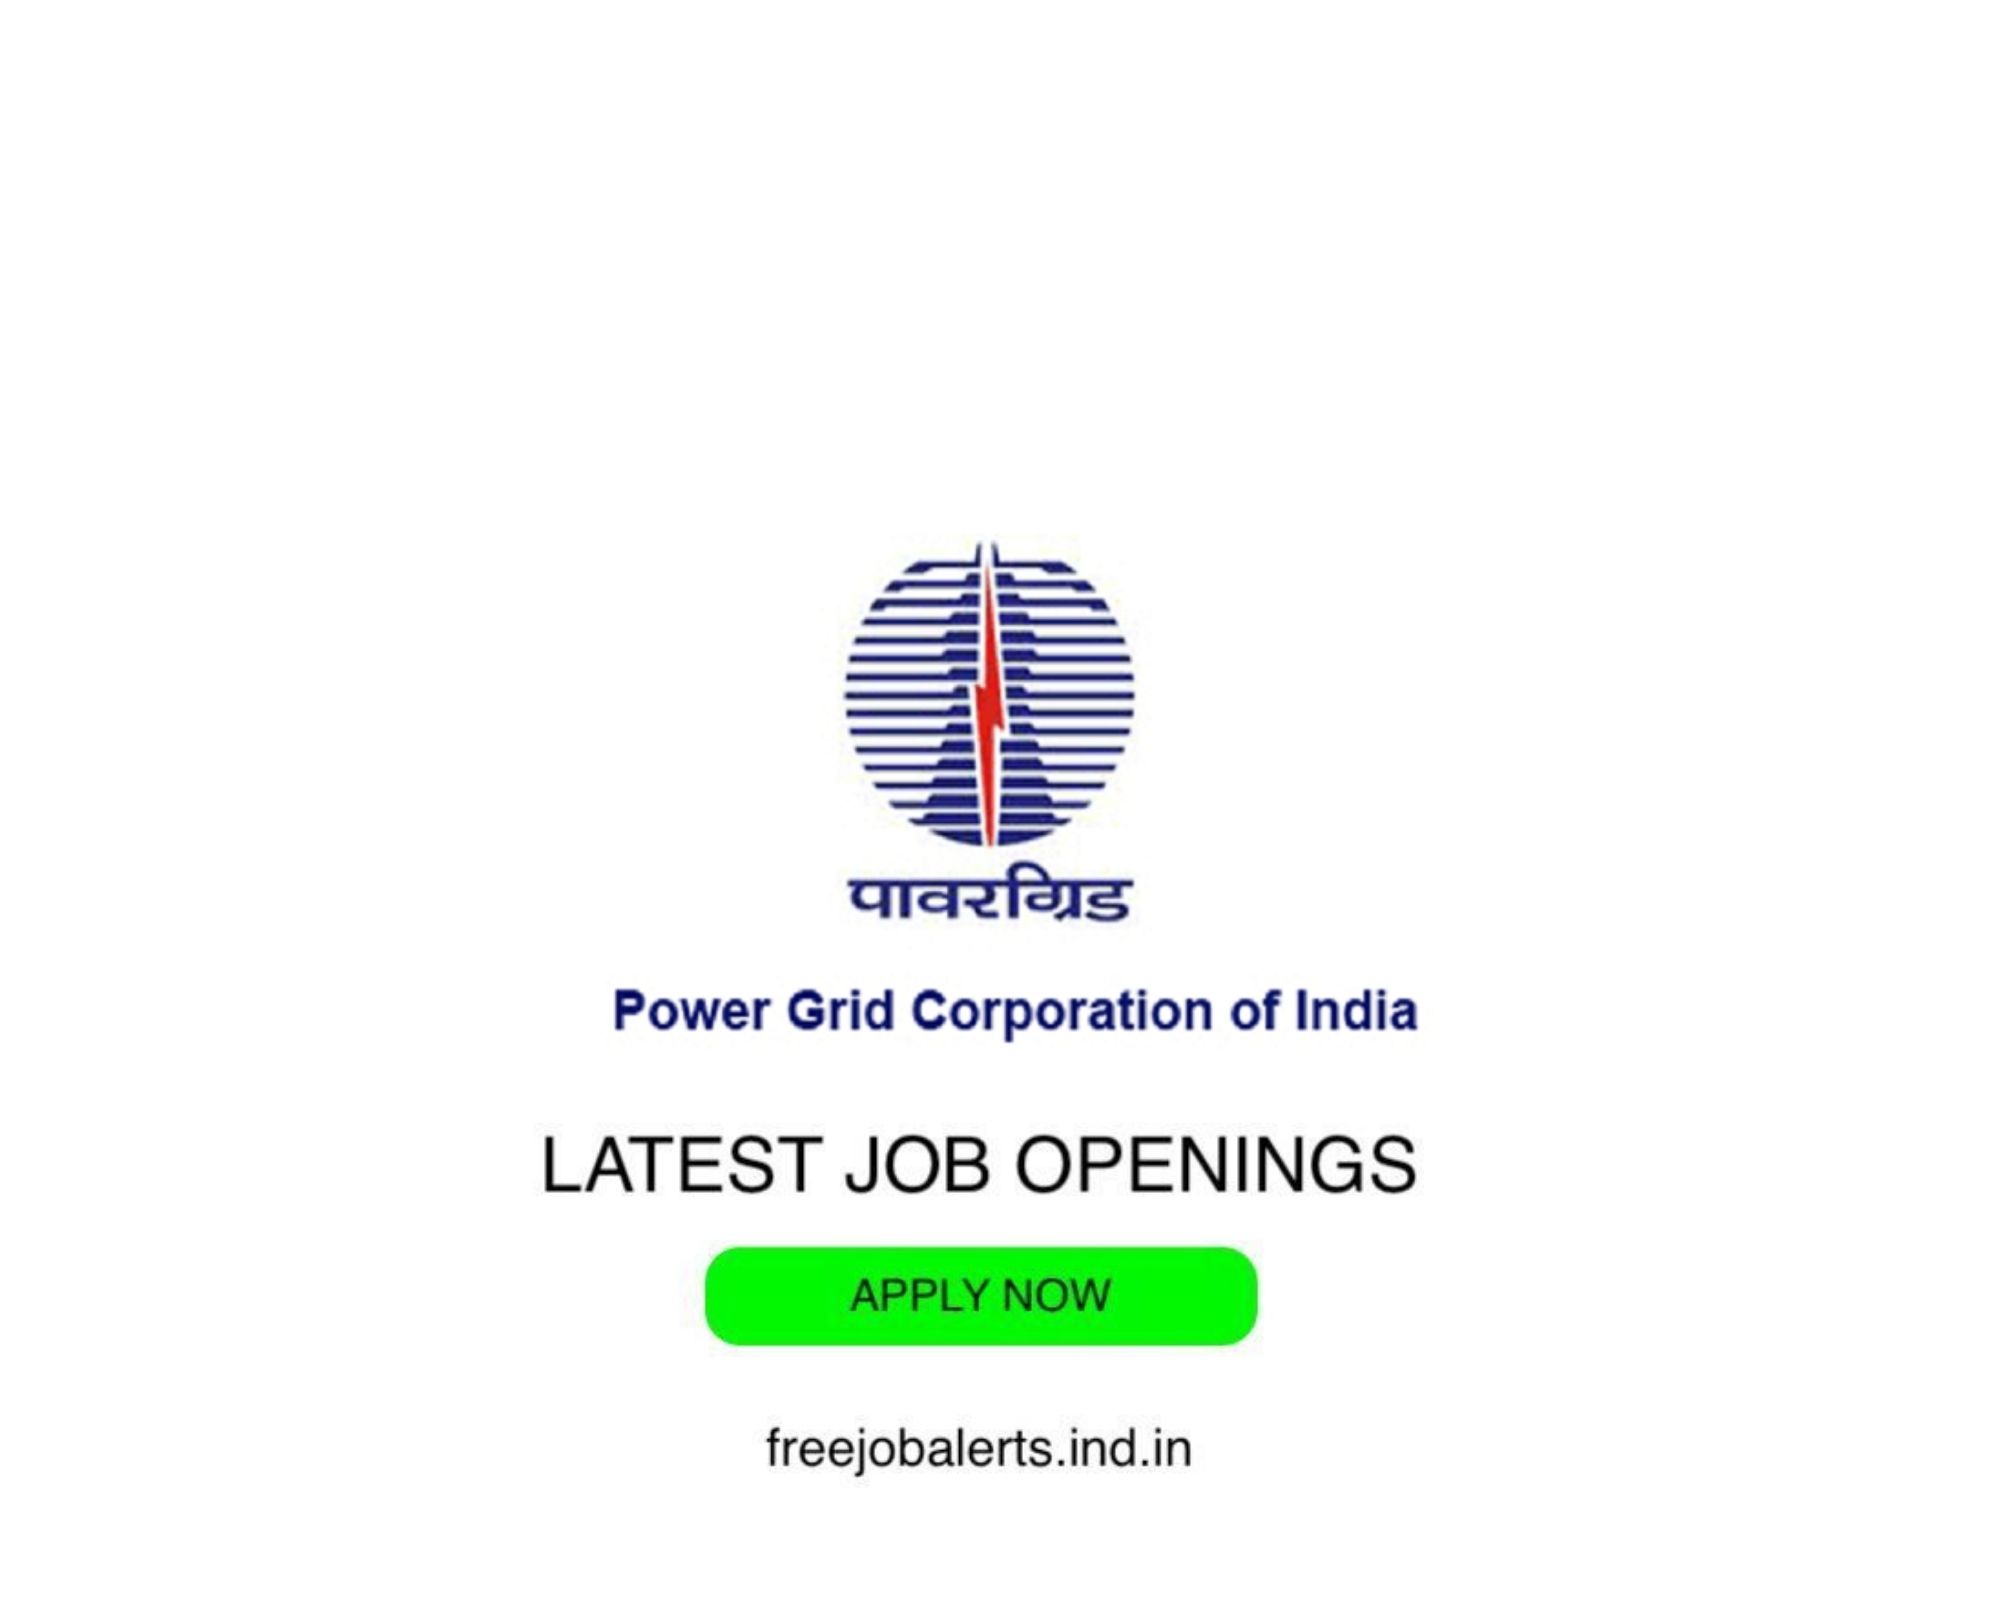 PGCIL- Power GRID Corporation of India Limited- Latest Govt job openings - Free job alerts, Indian Govt Jobs